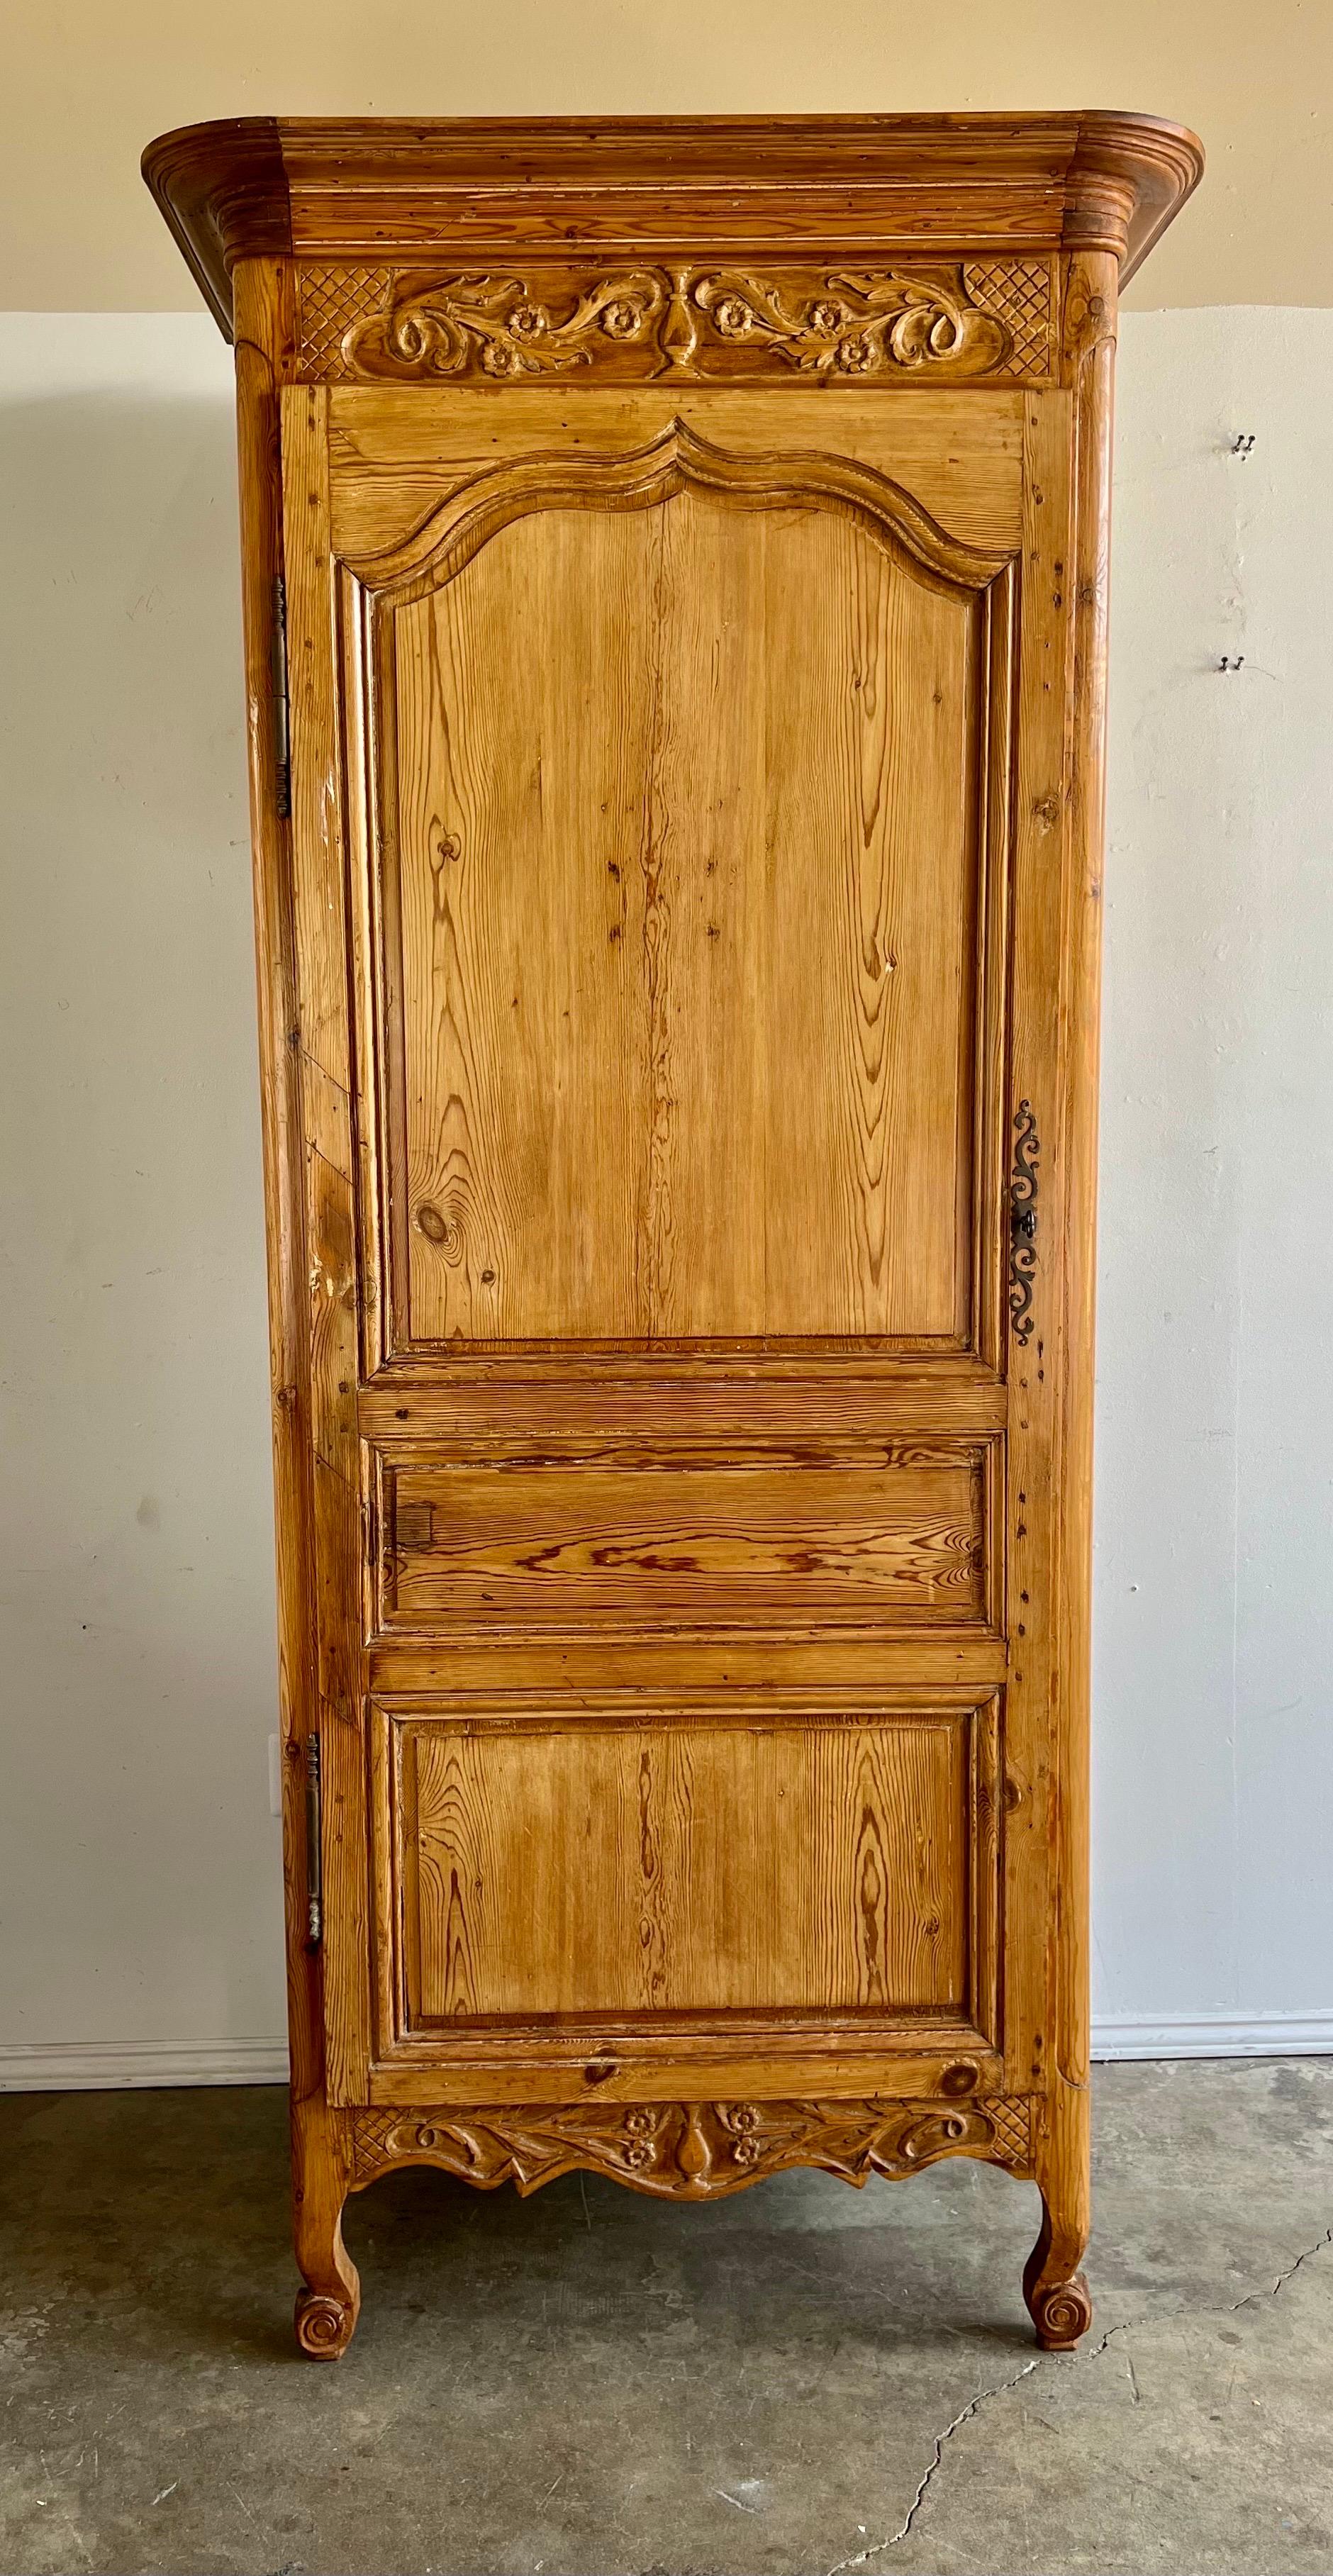 19th C. French Provincial style pine cabinet. There is one door that reveals great storage. The piece stands on four cabriole legs with rams head detail. Carving at top depicts swirling acanthus leaves and flowers flanking a center urn.